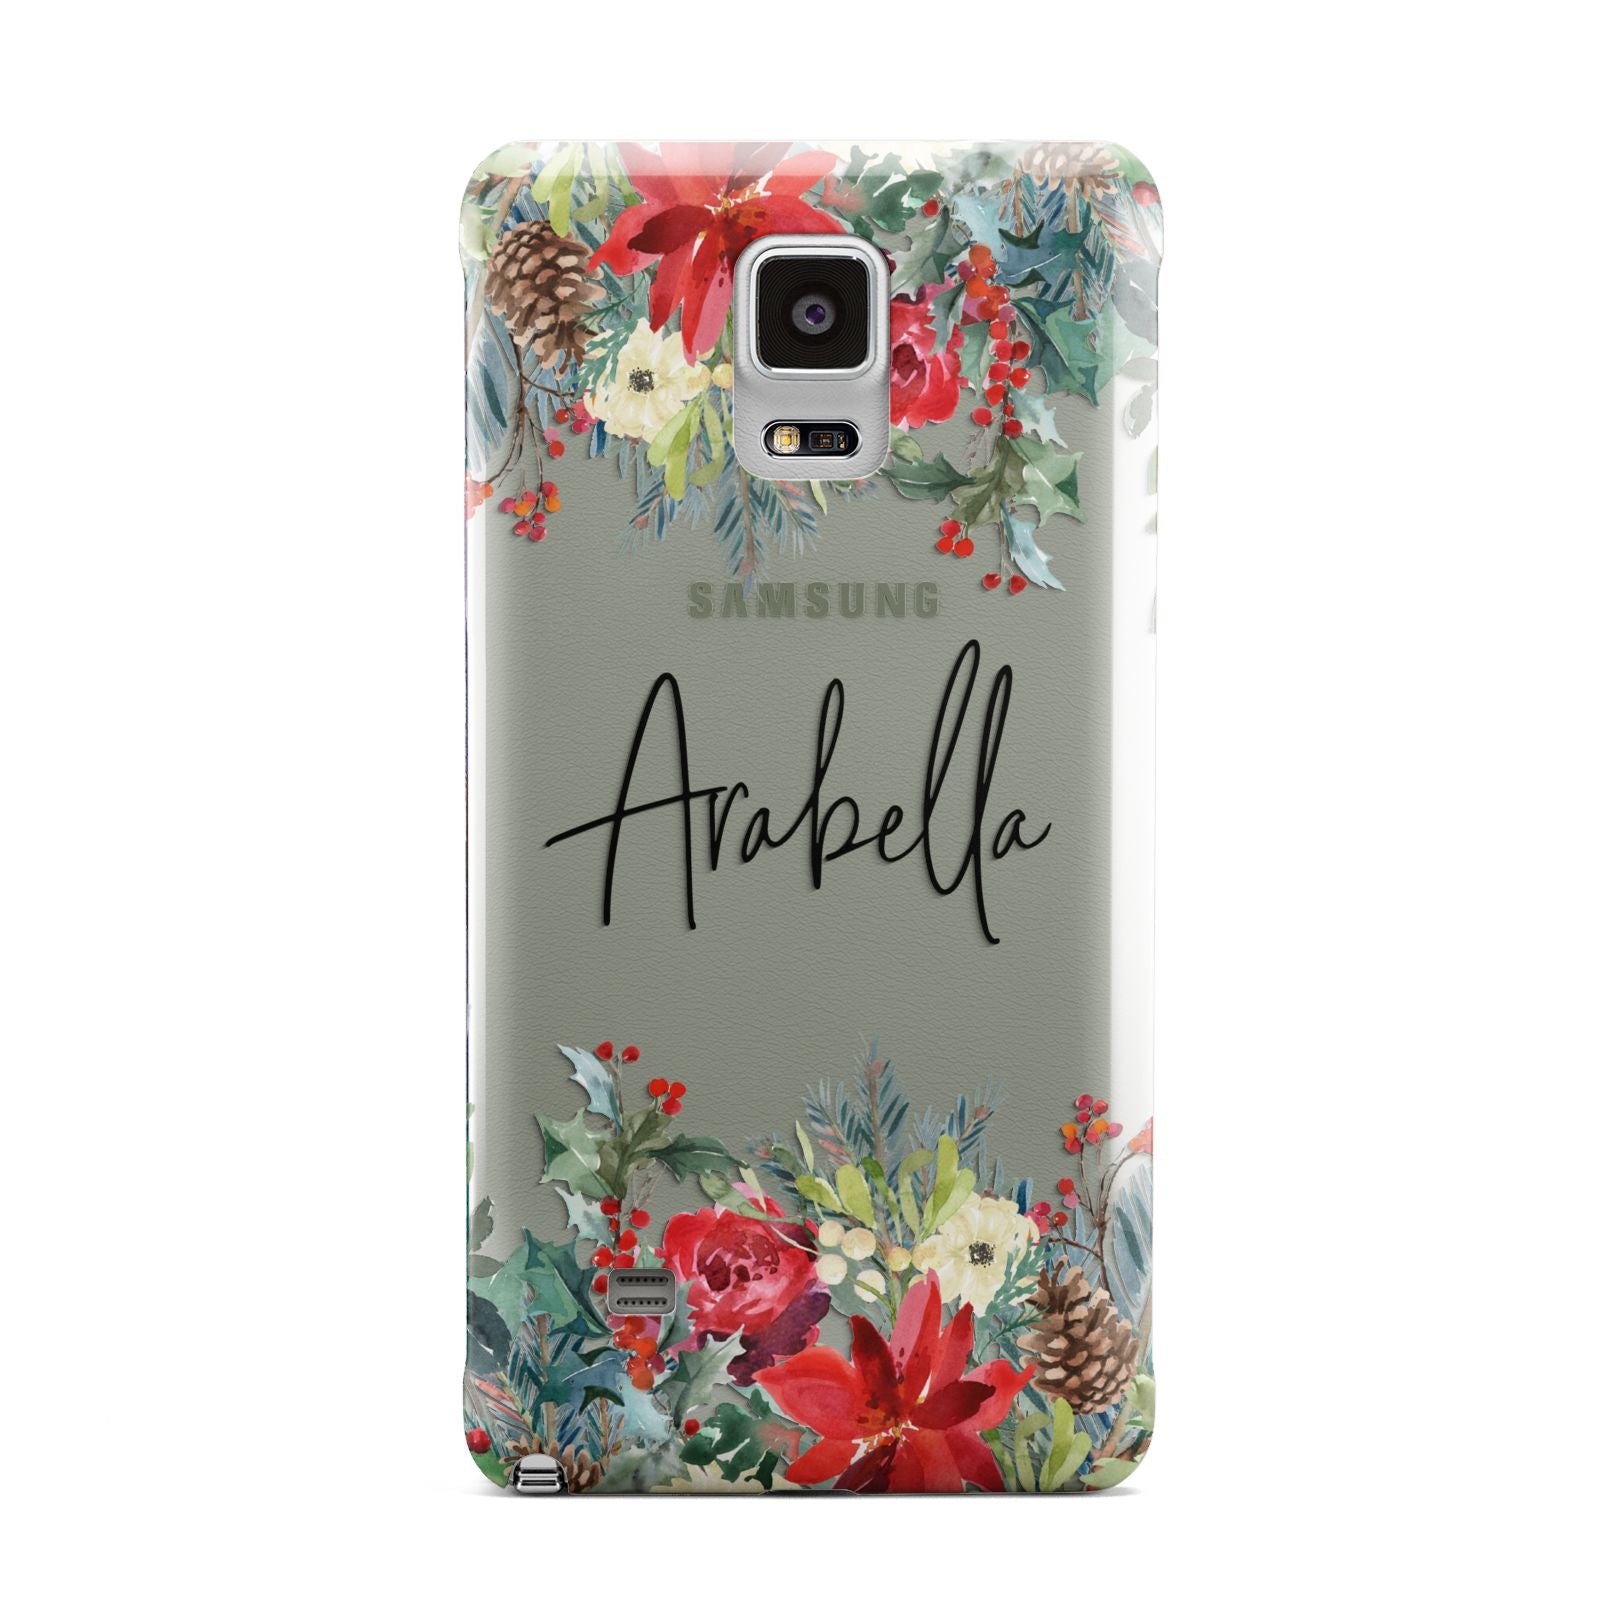 Personalised Floral Winter Arrangement Samsung Galaxy Note 4 Case